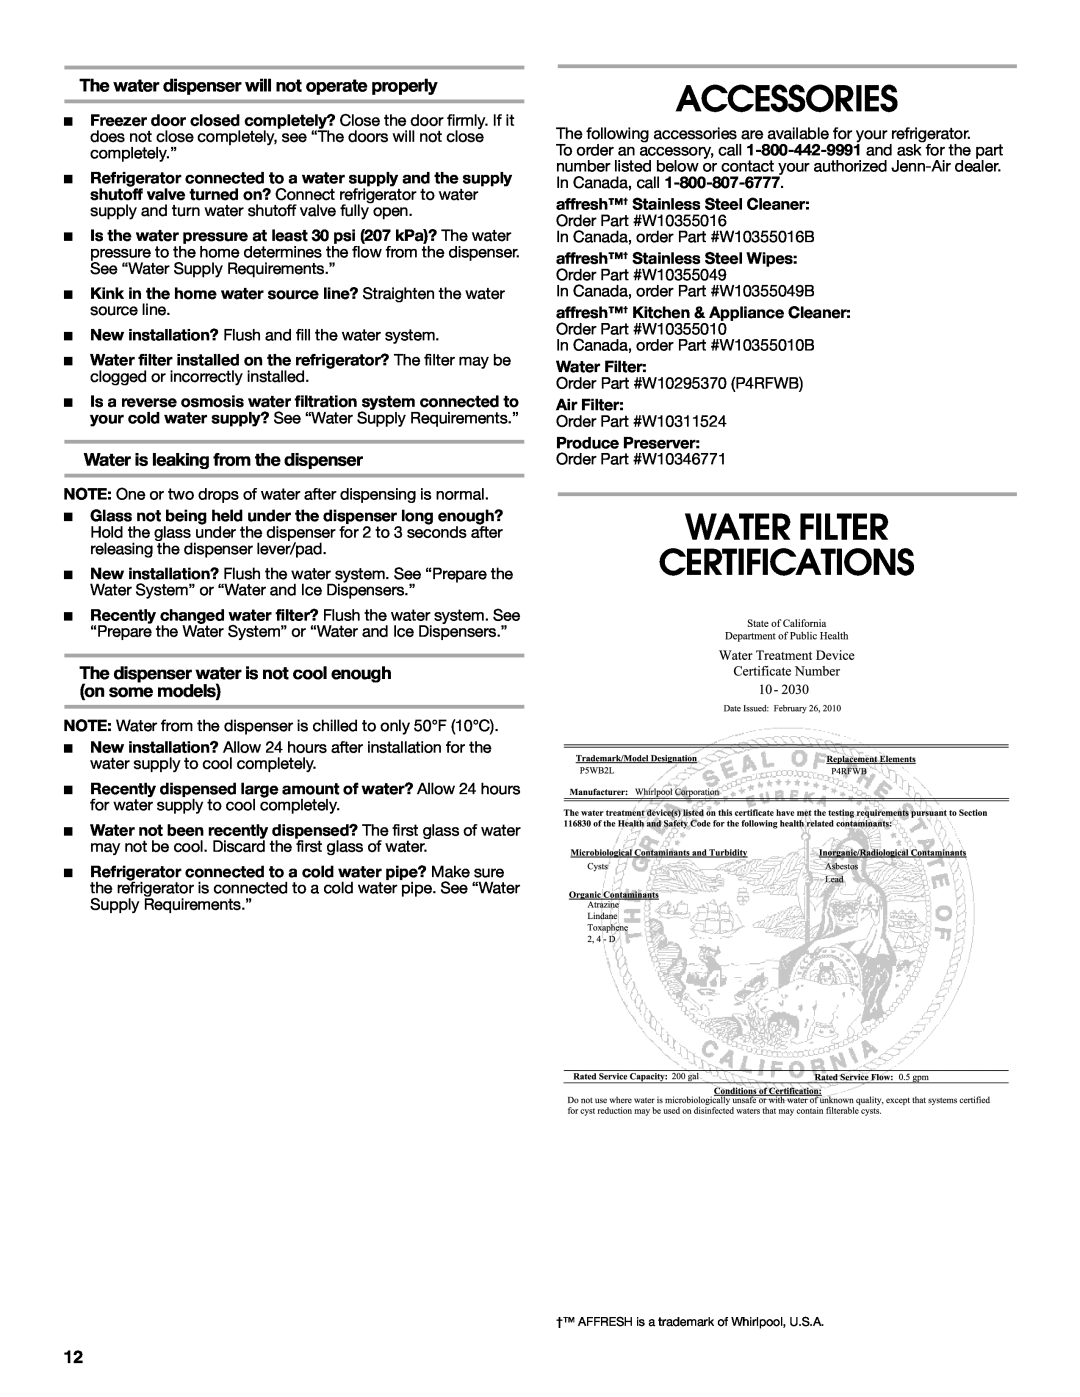 Jenn-Air W10487492A warranty Accessories, Water Filter Certifications, The water dispenser will not operate properly 